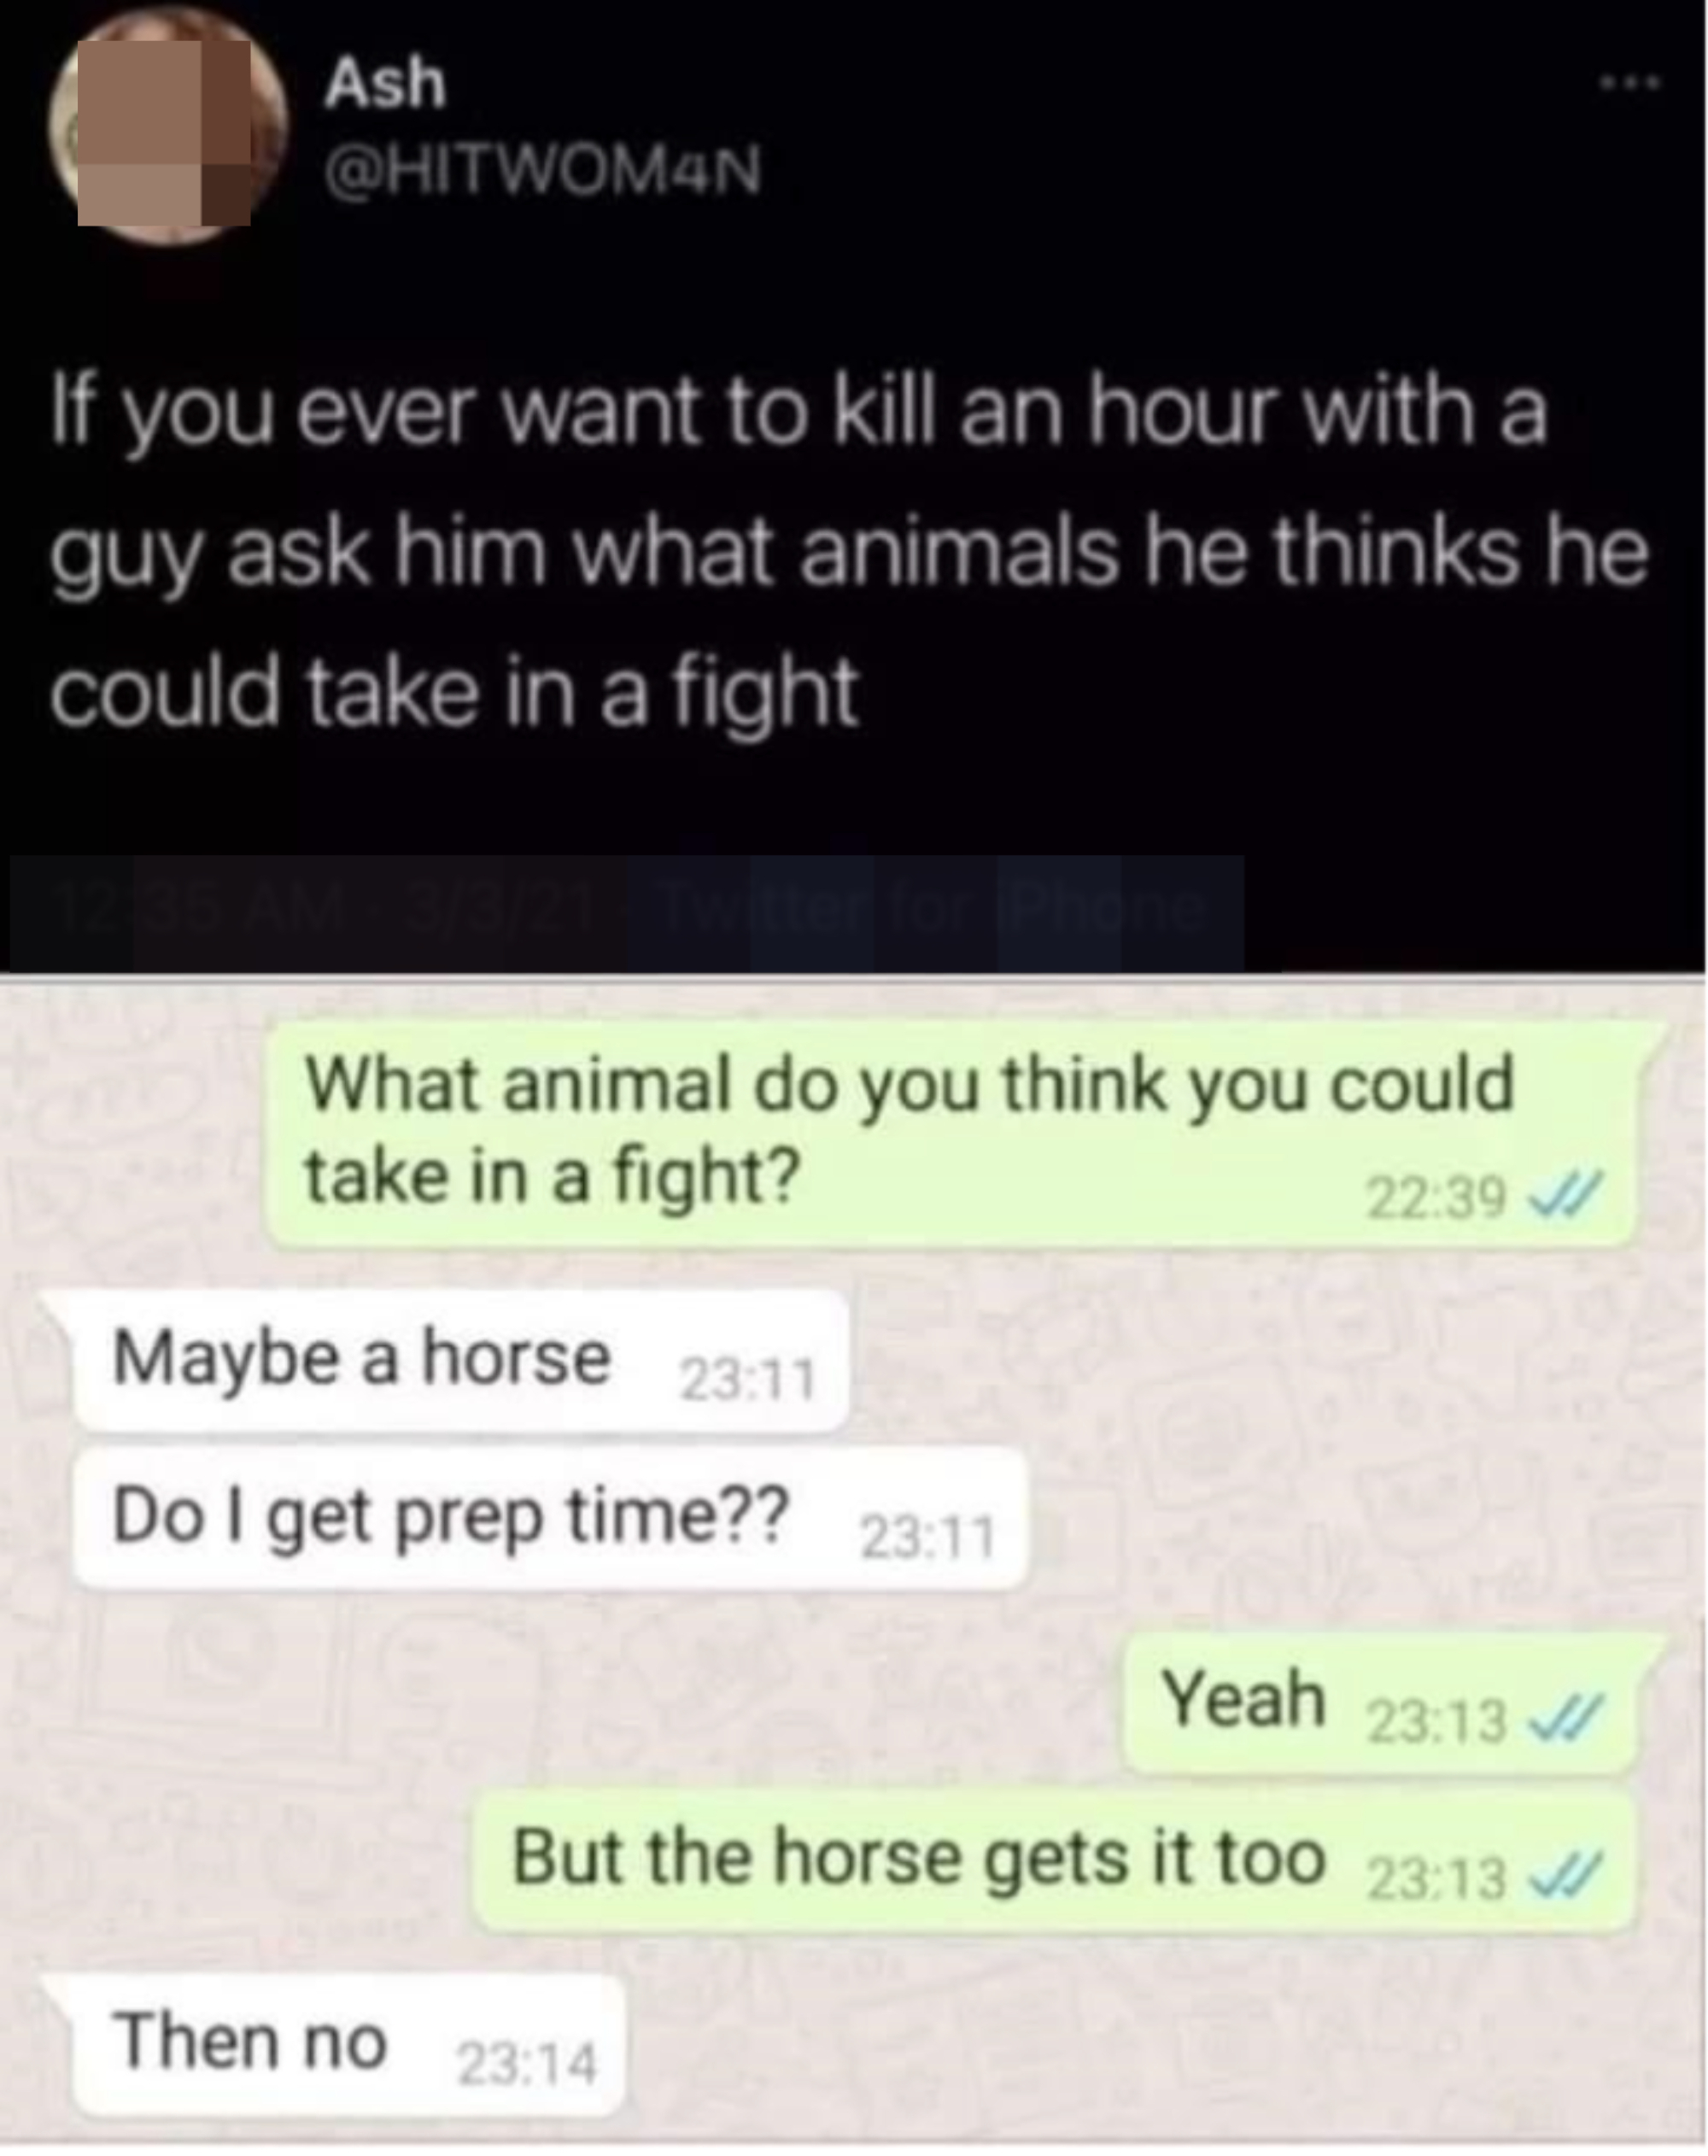 &quot;If you ever want to kill an hour with a guy ask him what animals he thinks he could take in a fight&quot;: &quot;What animal do you think you could take in a fight?&quot; &quot;Maybe a horse, do I get prep time?&quot; &quot;Yeah, but the horse gets it too&quot;; &quot;Then no&quot;